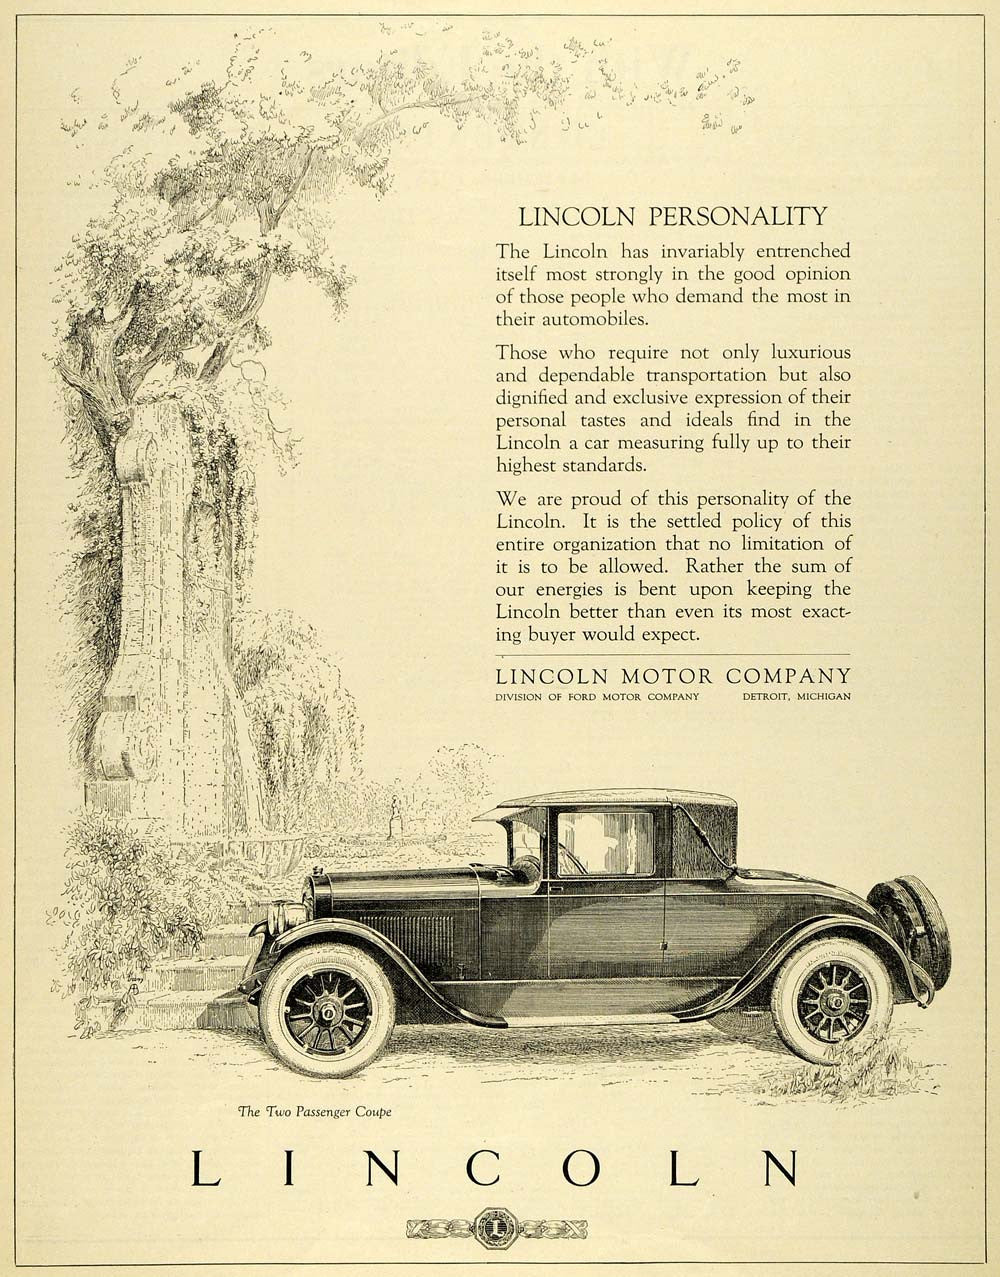 1923 Ad Lincoln Motor Vehicle Detroit Ford Michigan Coupe Transportation SCA3